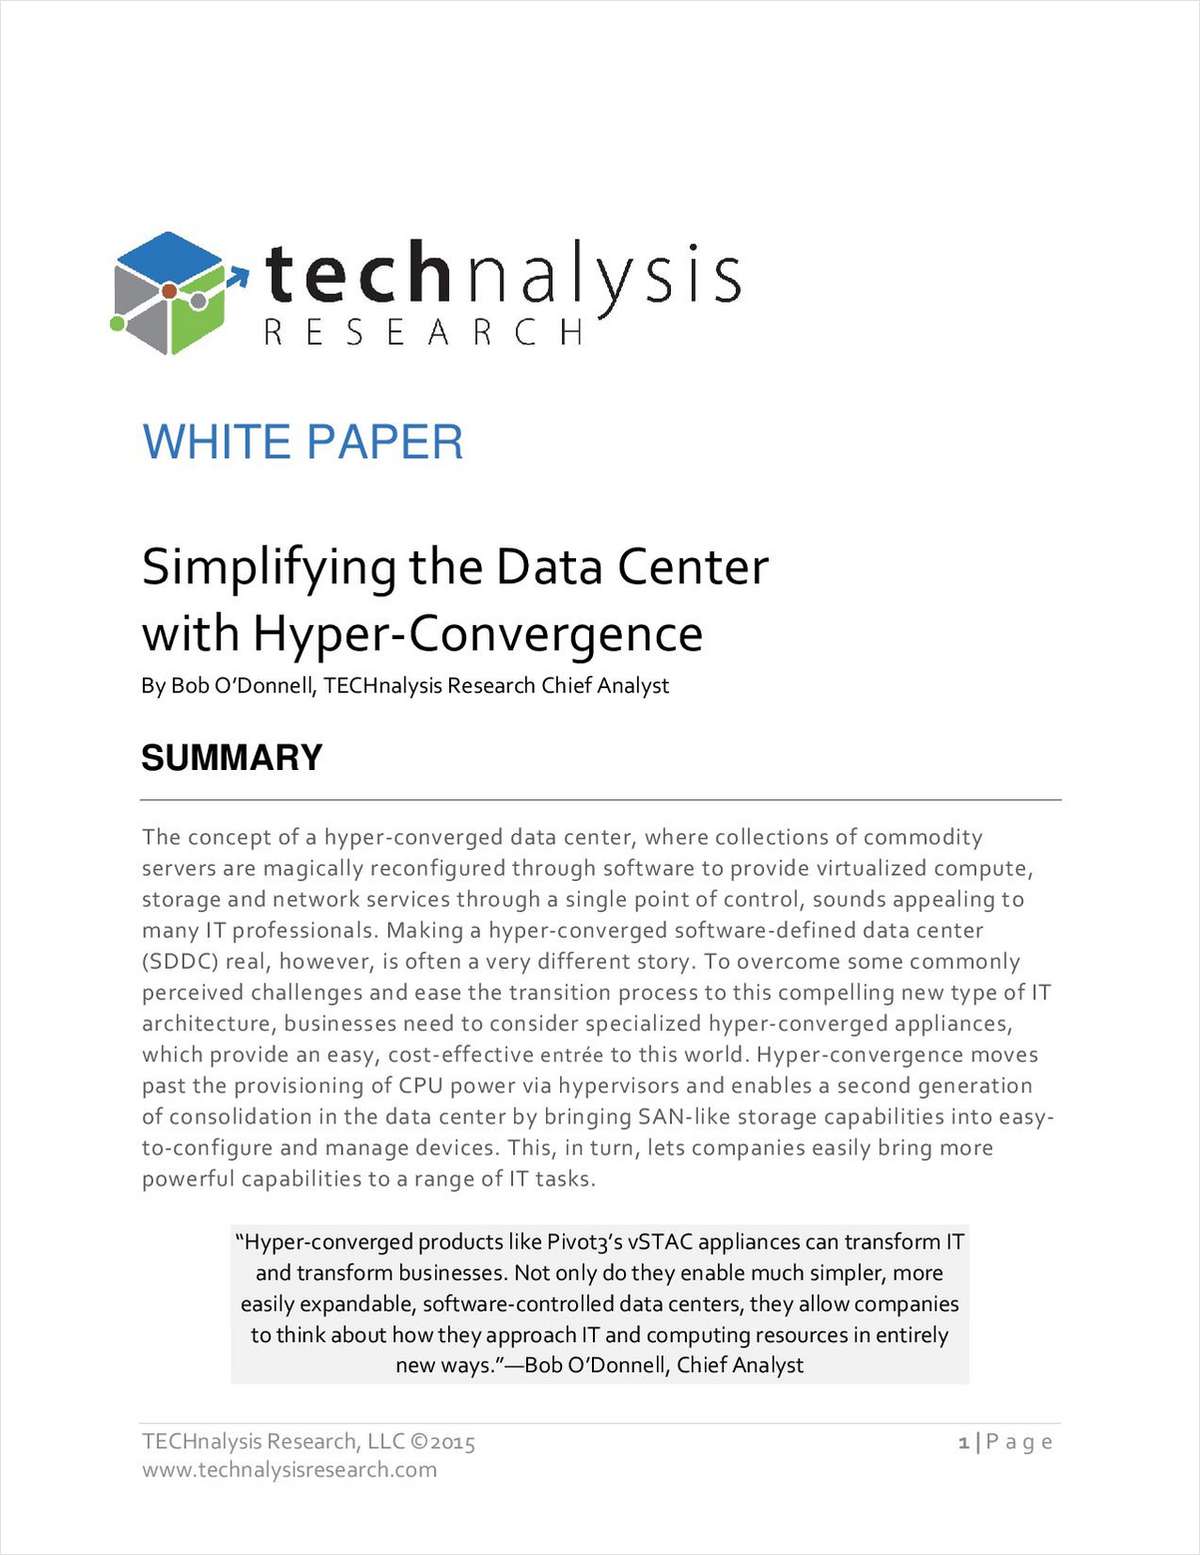 Simplifying the Data Center with Hyperconvergence